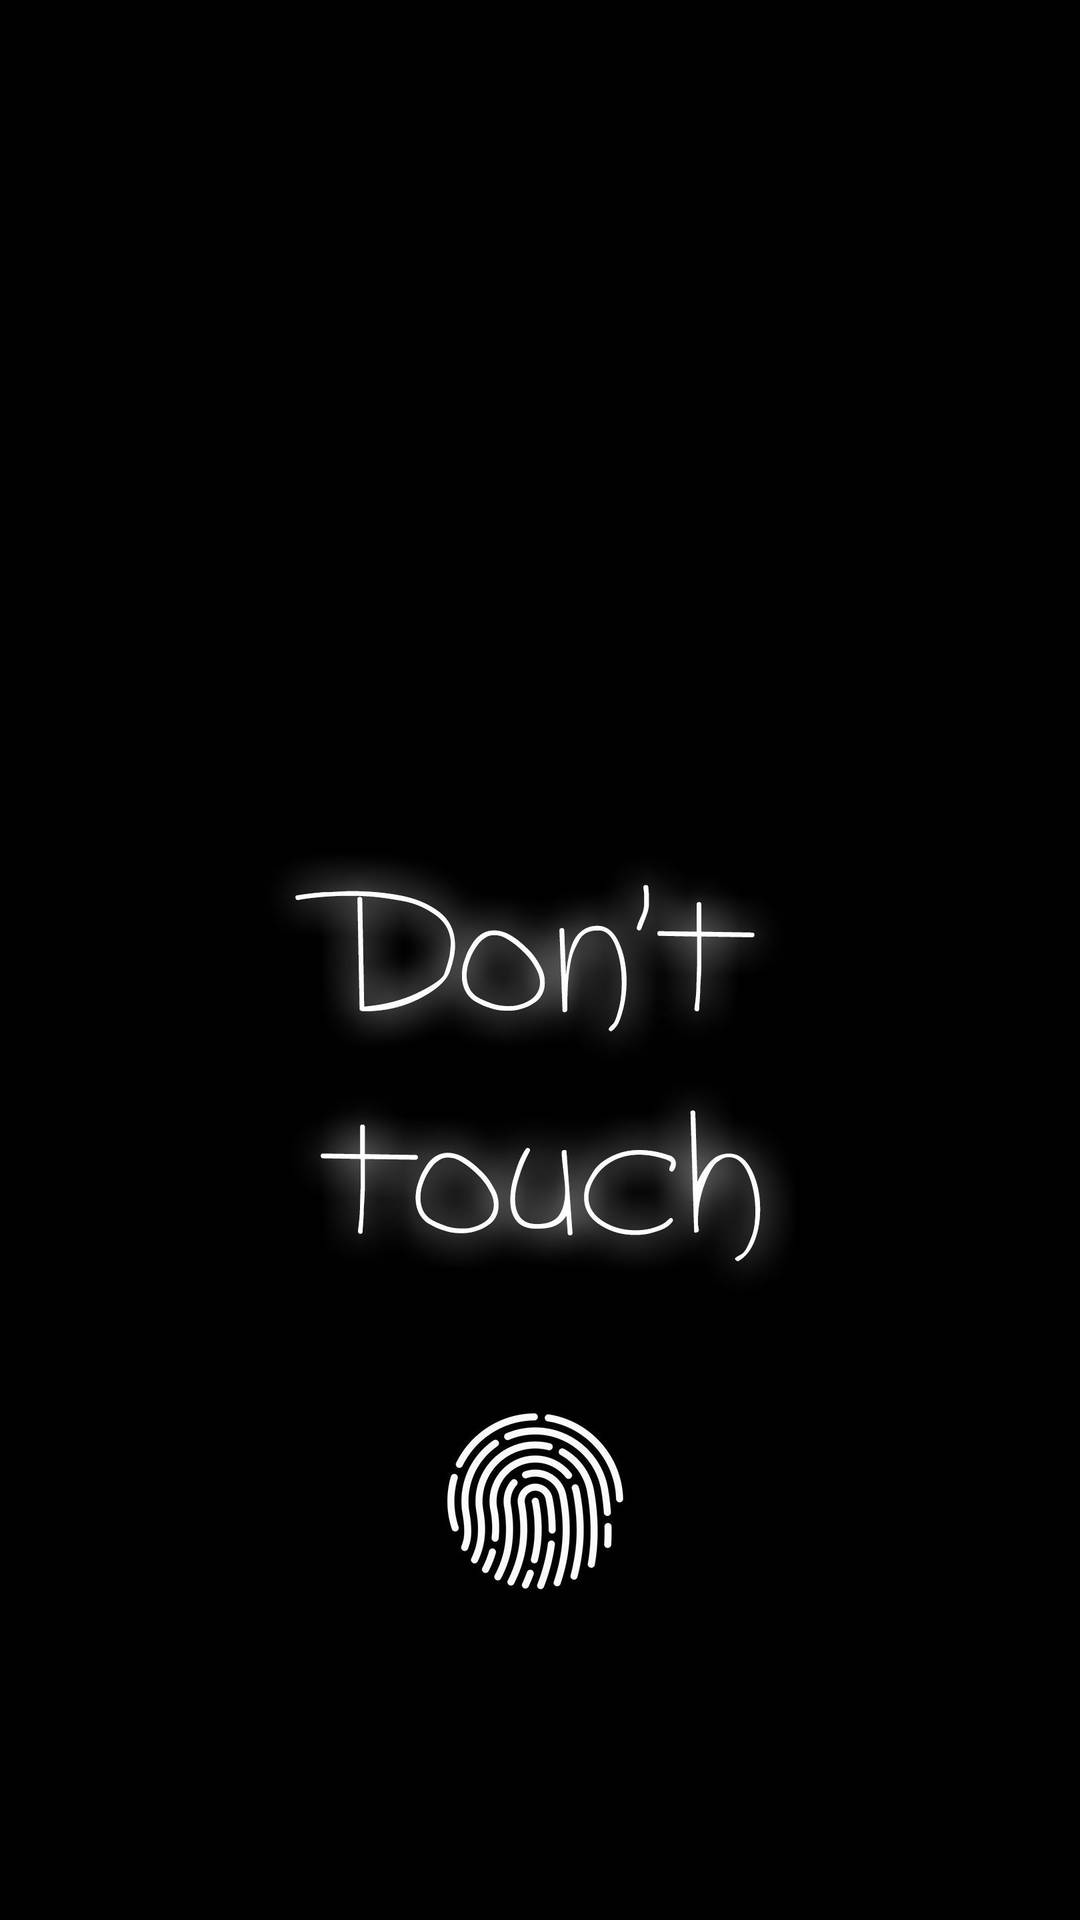 Download fingerprint wallpaper by tAiM00rKhAn  40  Free on ZEDGE now  Browse millions  Android wallpaper black Android phone wallpaper Dark  phone wallpapers